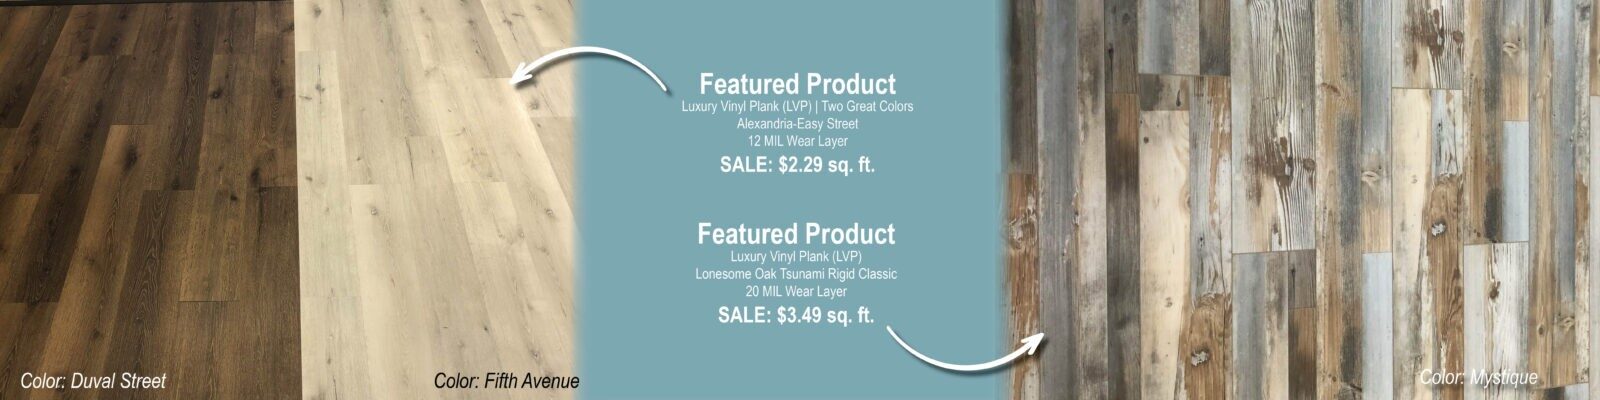 Featured Product Web Banner